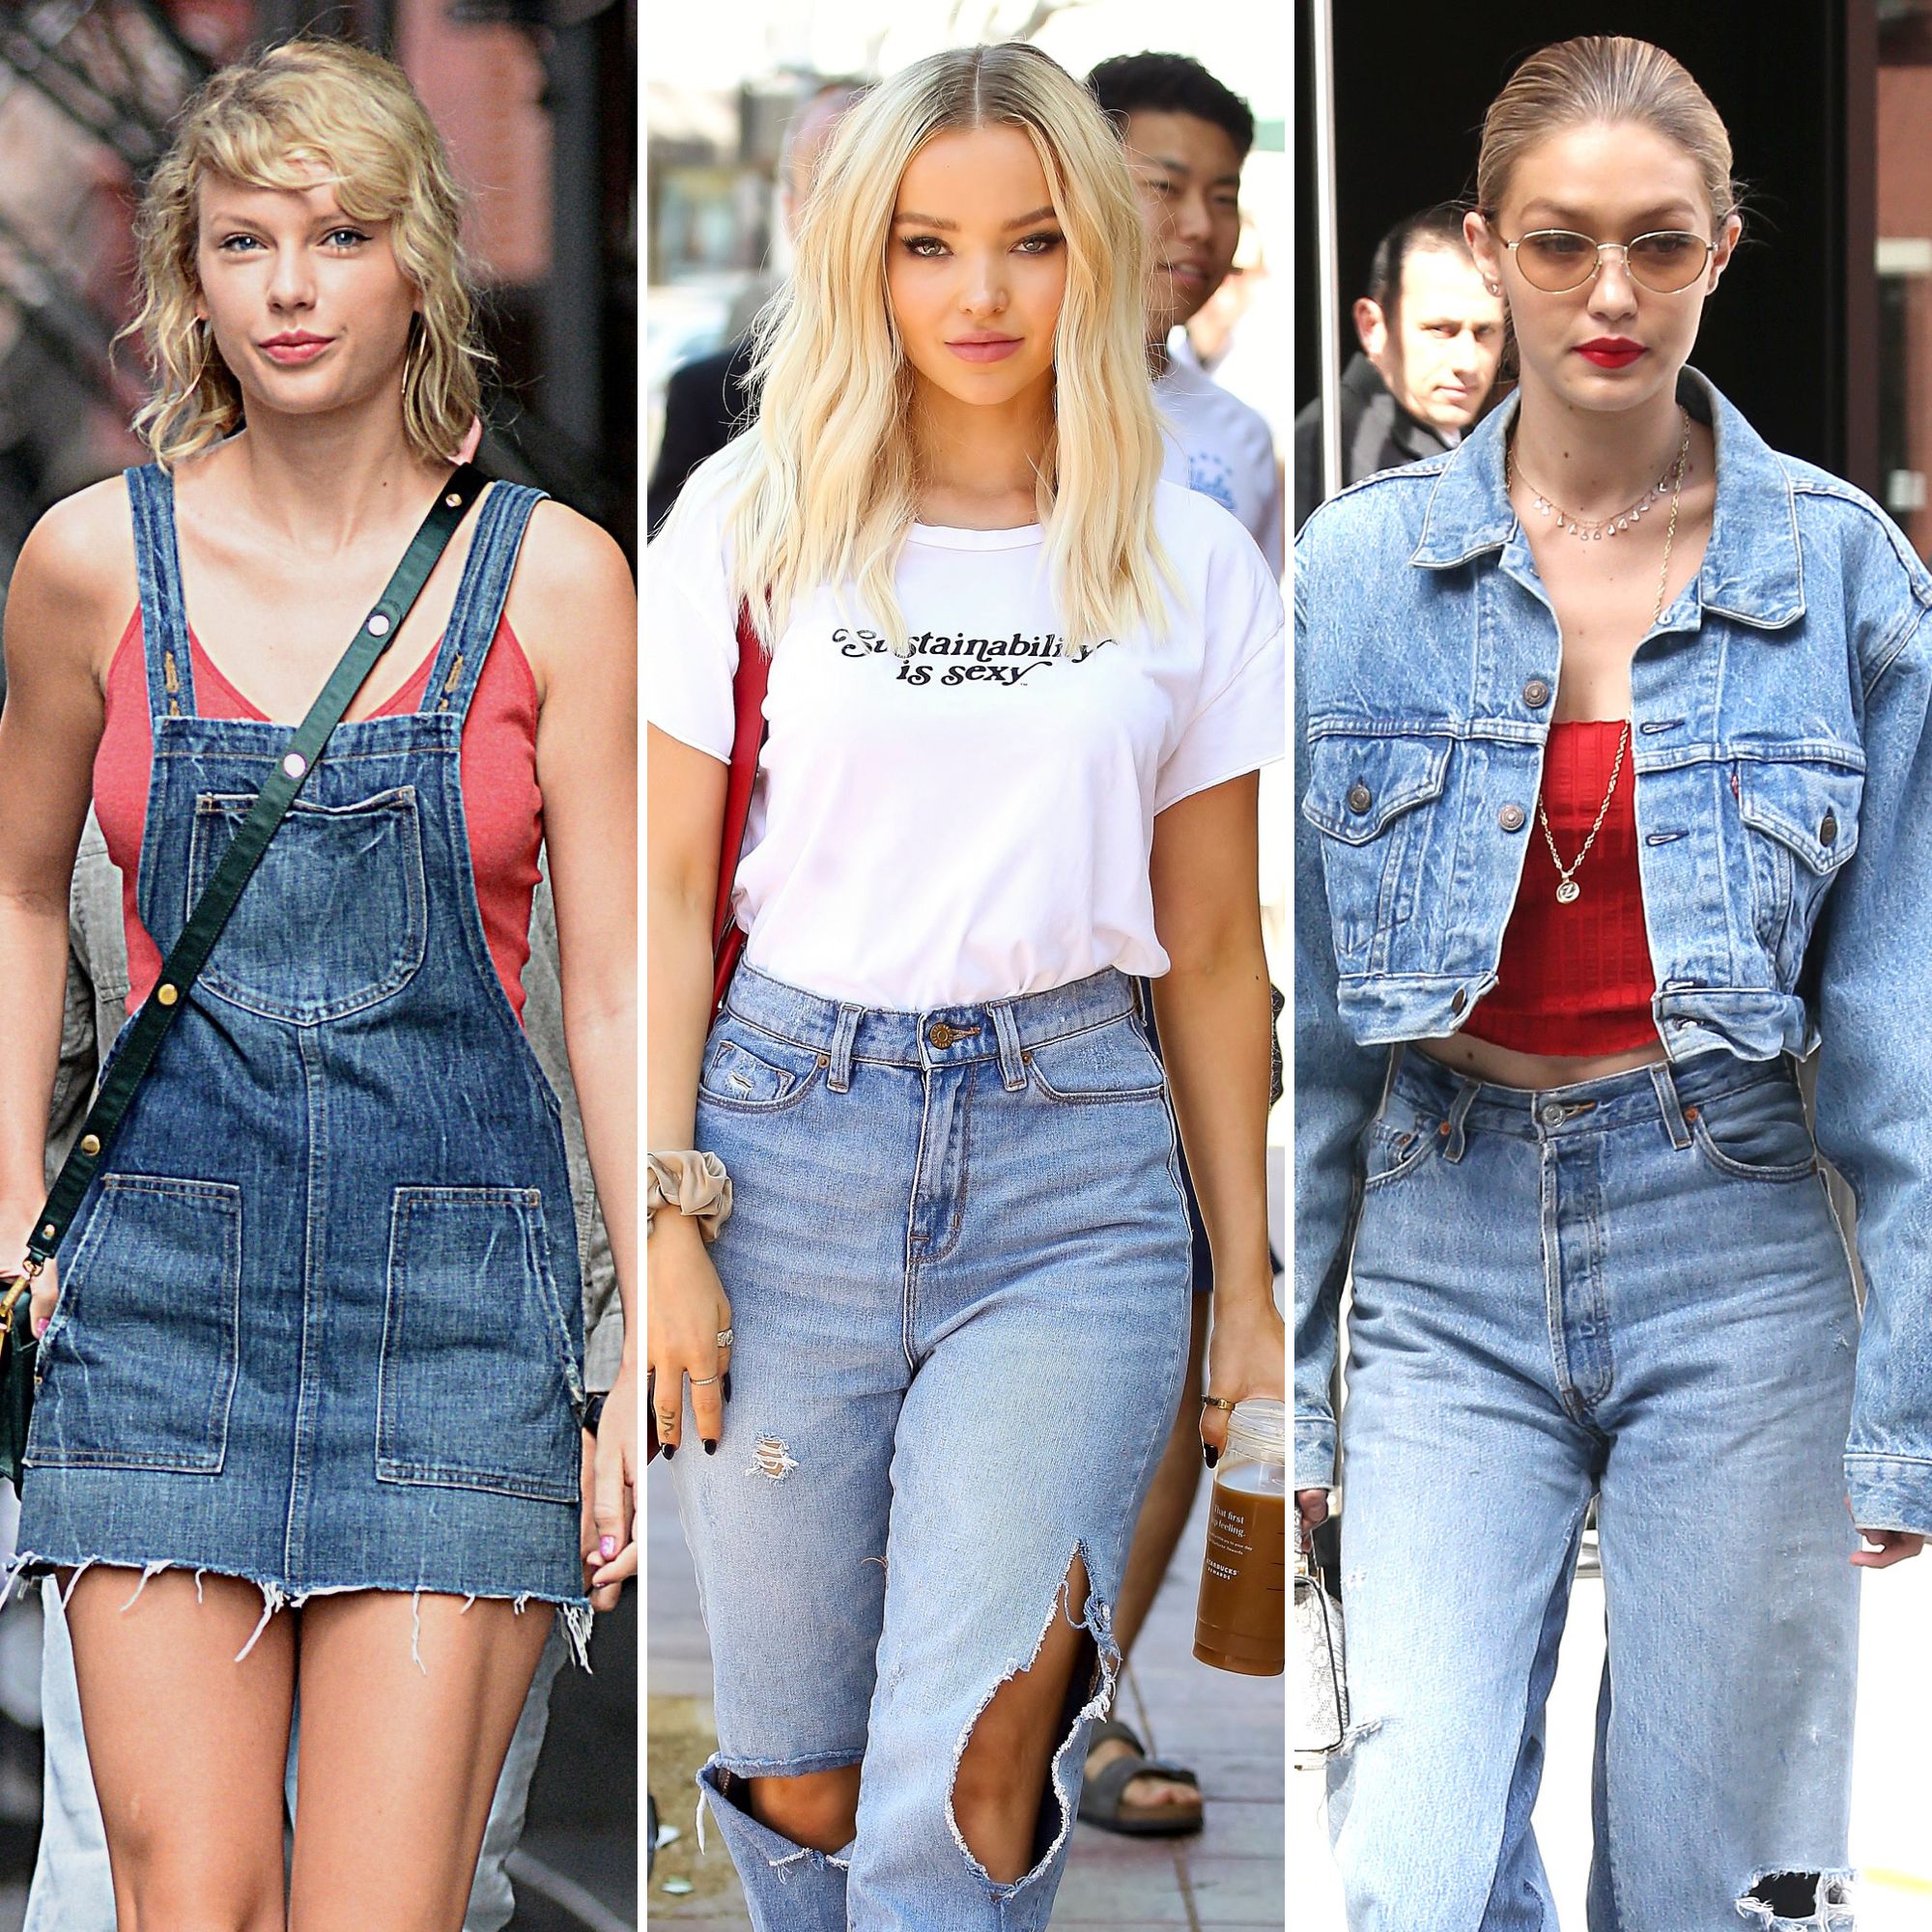 Celebrity Style: Fashion From Your Favorite Stars